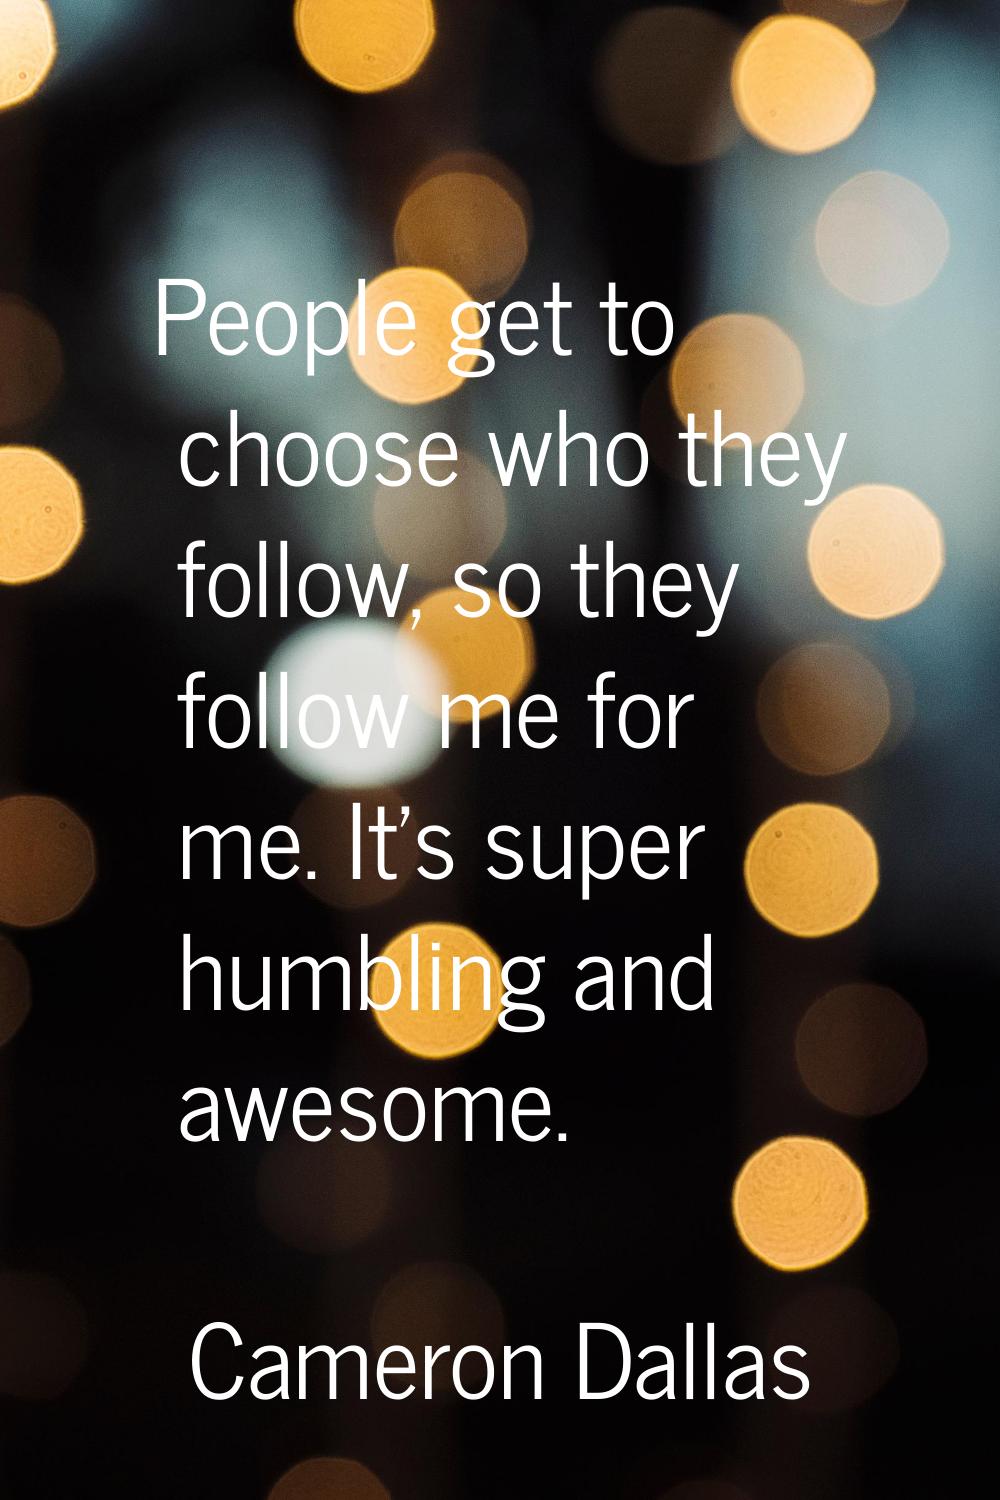 People get to choose who they follow, so they follow me for me. It's super humbling and awesome.